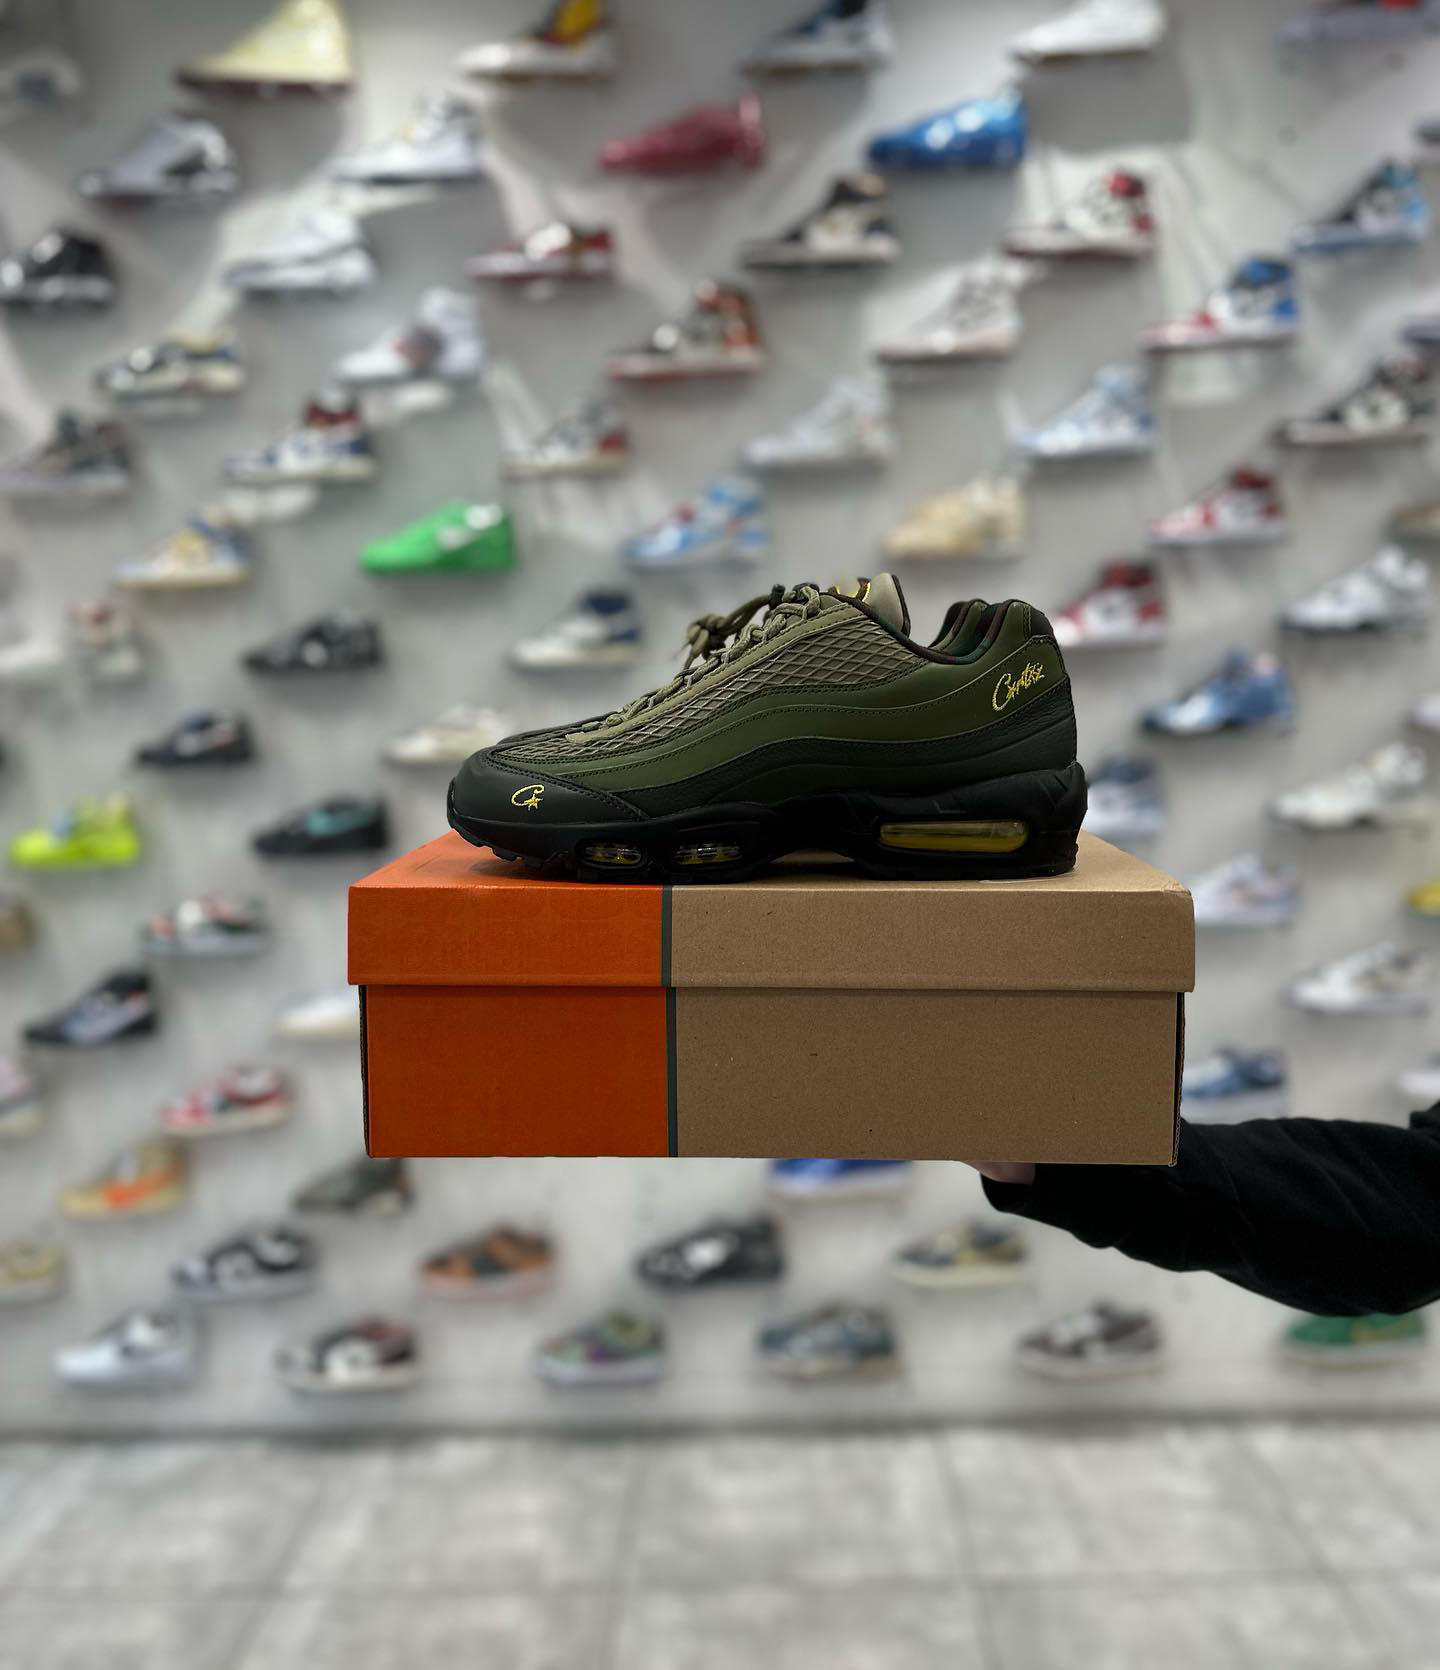 Nike Air Max 95 Corteiz available in store